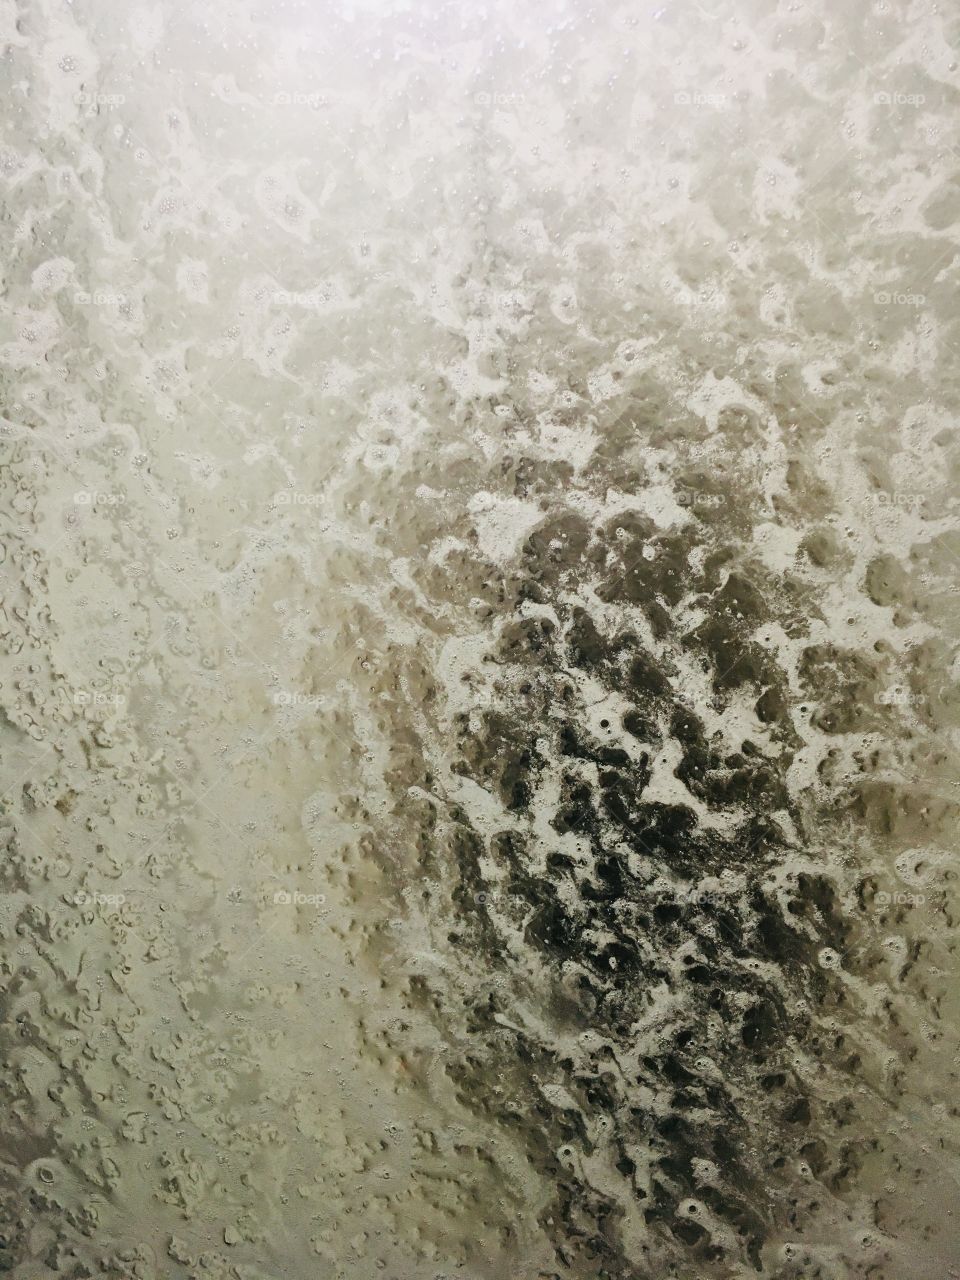 Water and soap through a window